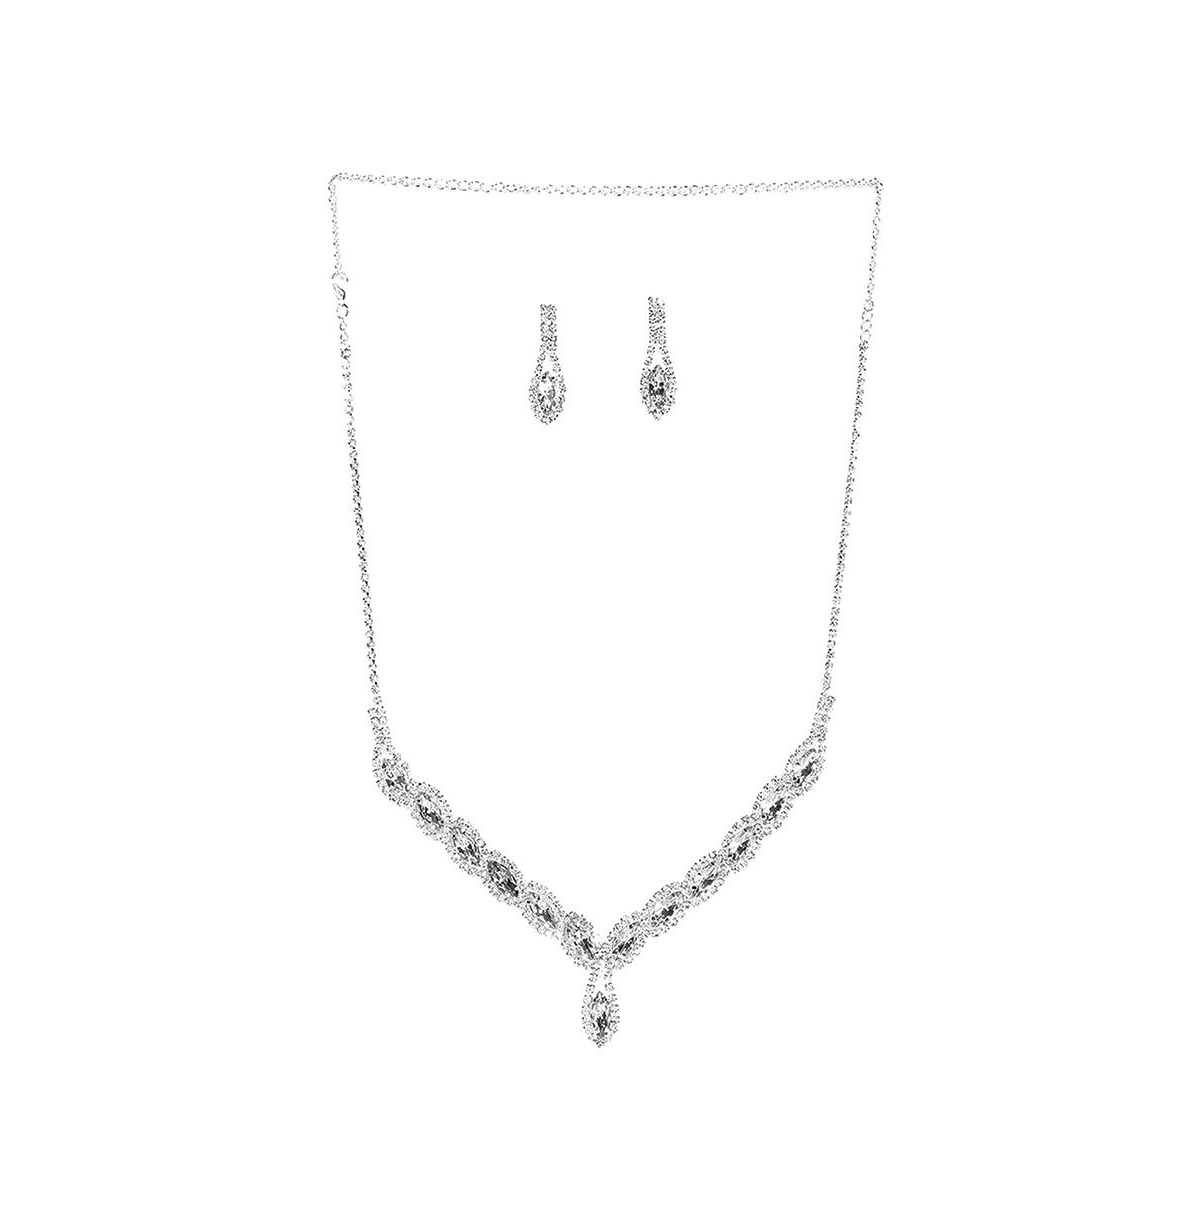 Sohi Women's Silver Bling Stone Necklace And Earrings (set Of 2)